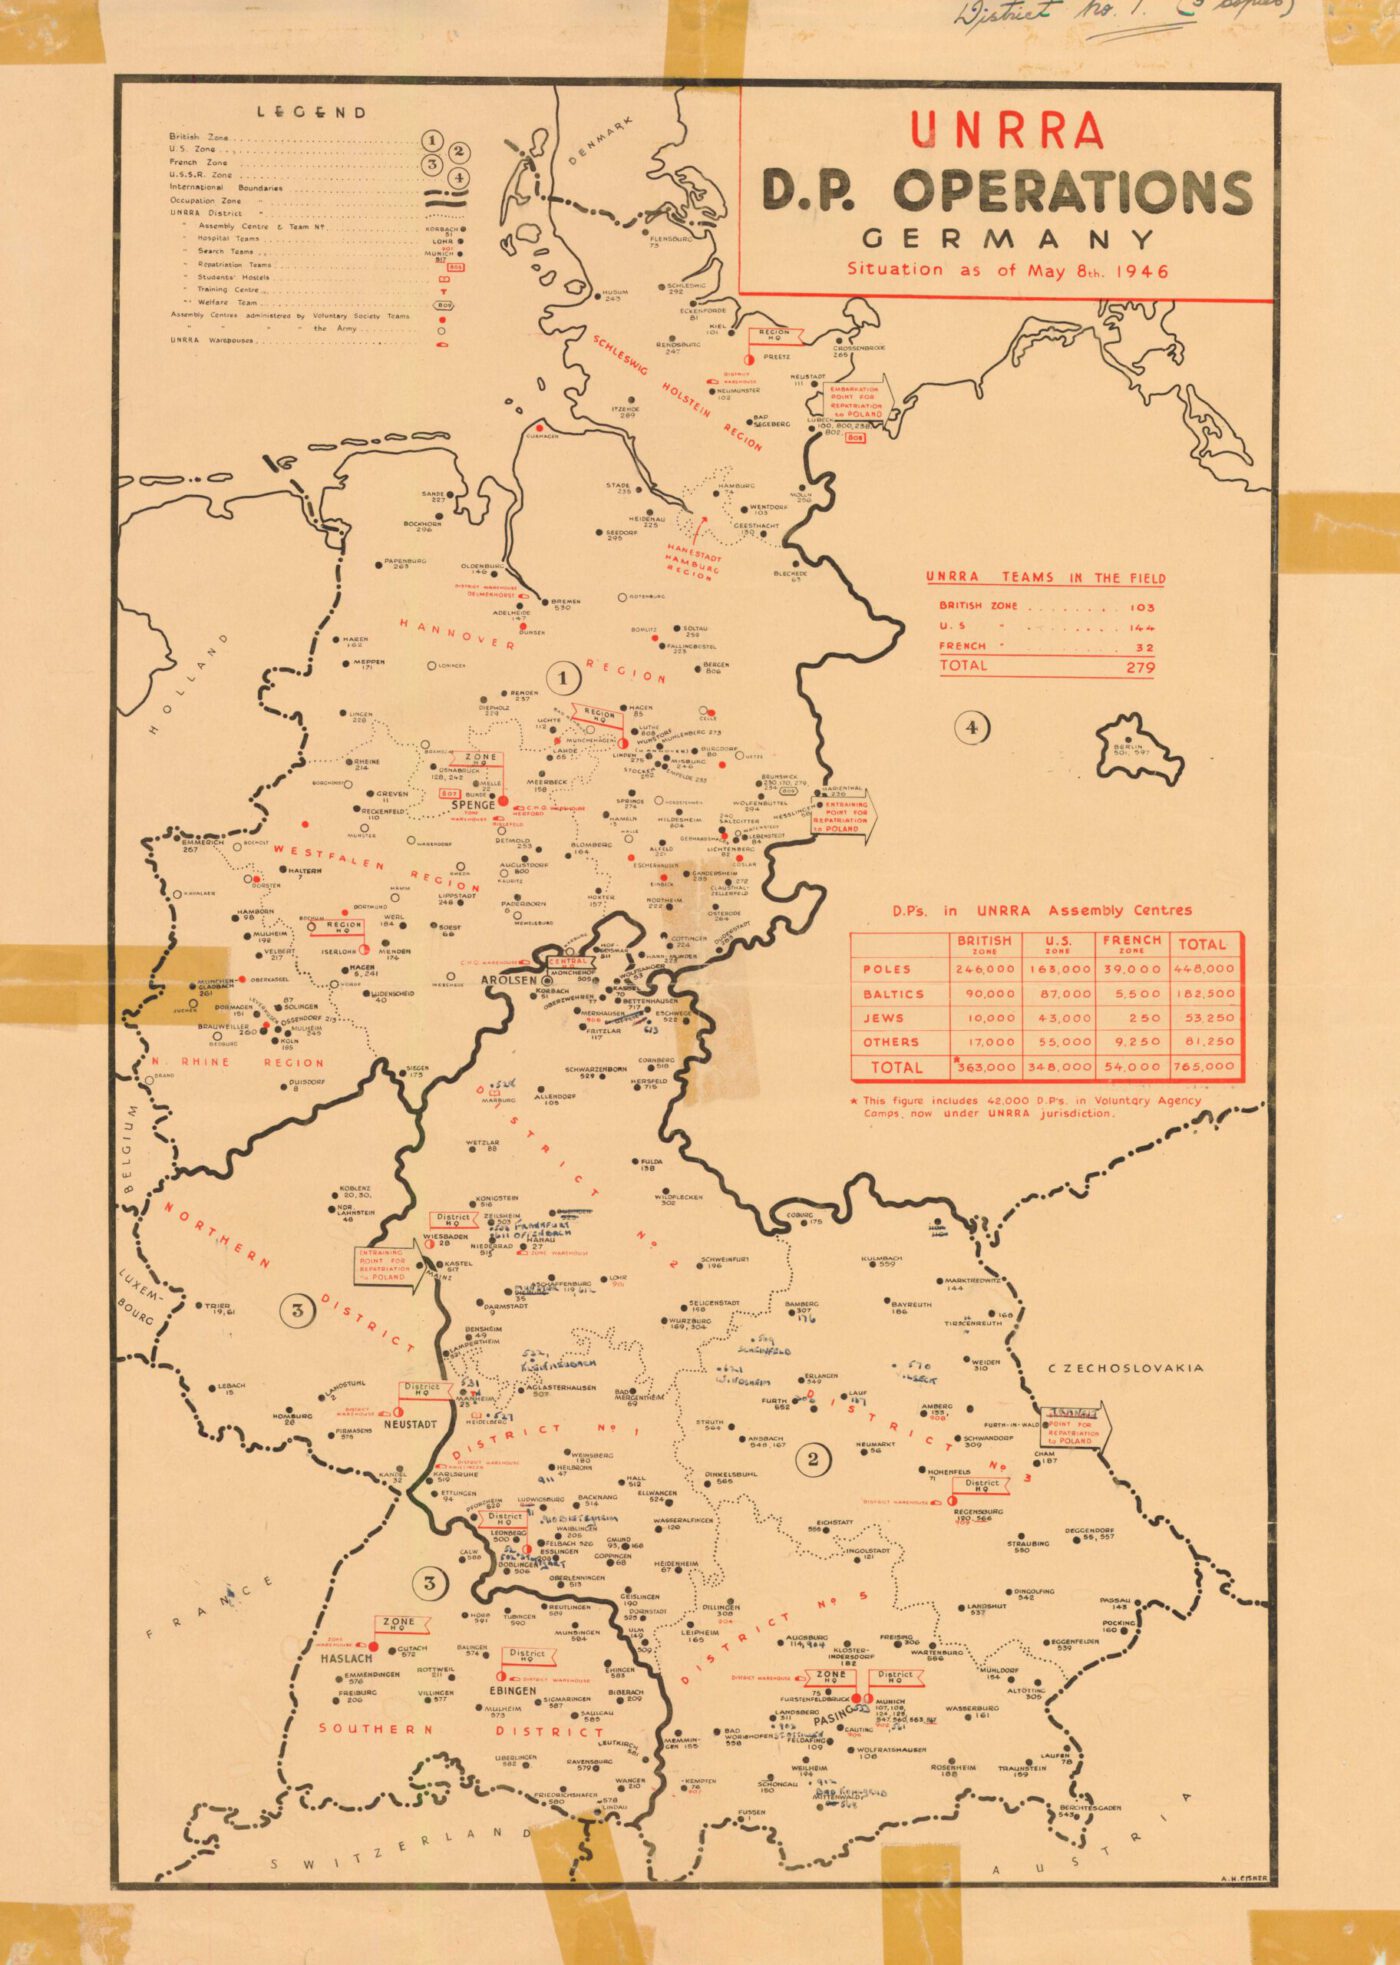 UNRRA D.P. Operations Germany map, May 8, 1946. 6.2.2 / 129799278 ITS Digital Archive, Arolsen Archive